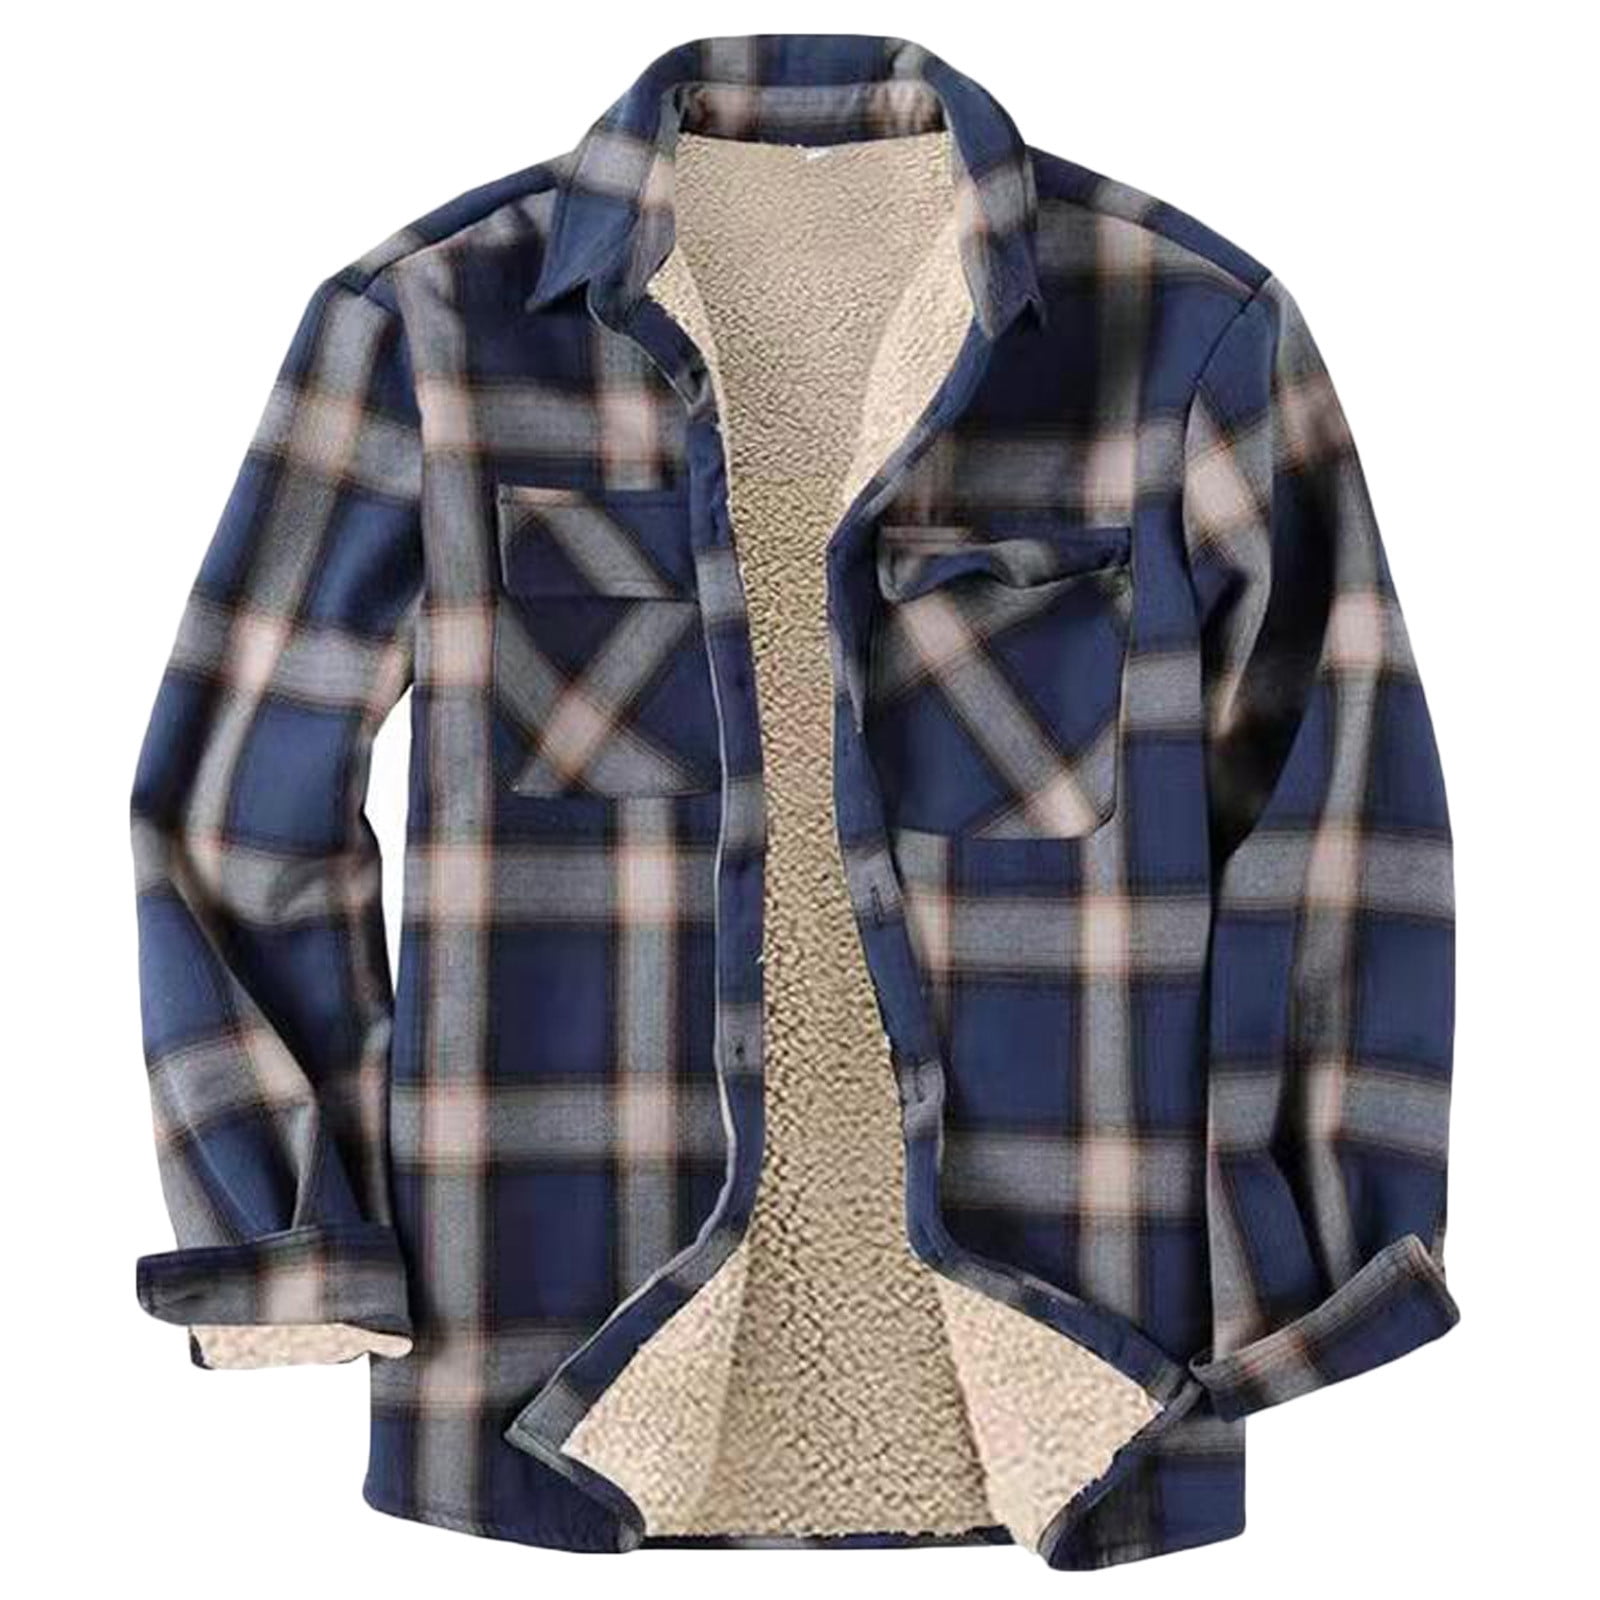 Thermal T-shirt - FLANNEL SHIRT PATTERN with silver